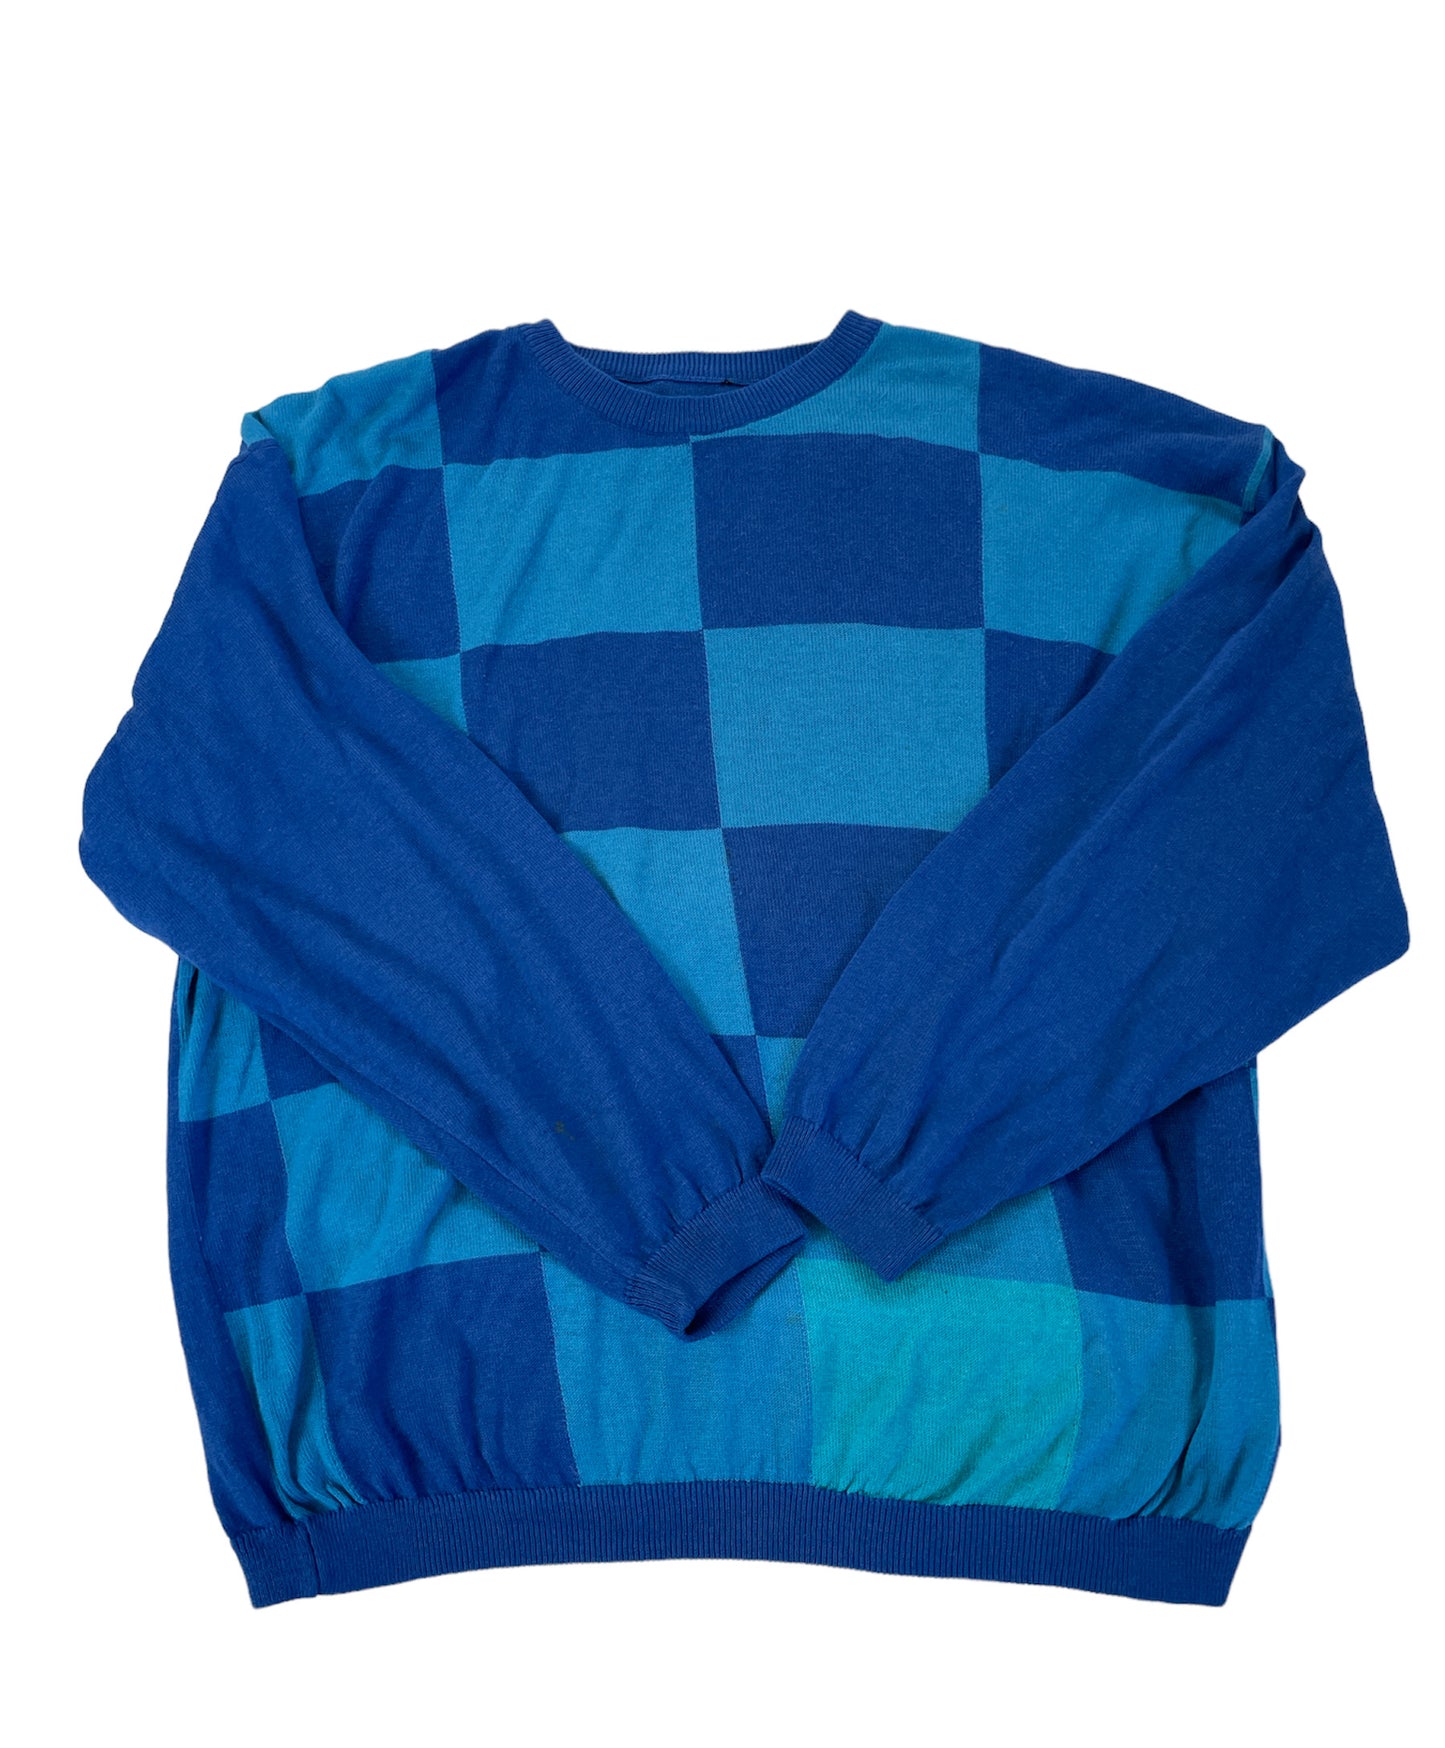 Blue checkered sweater